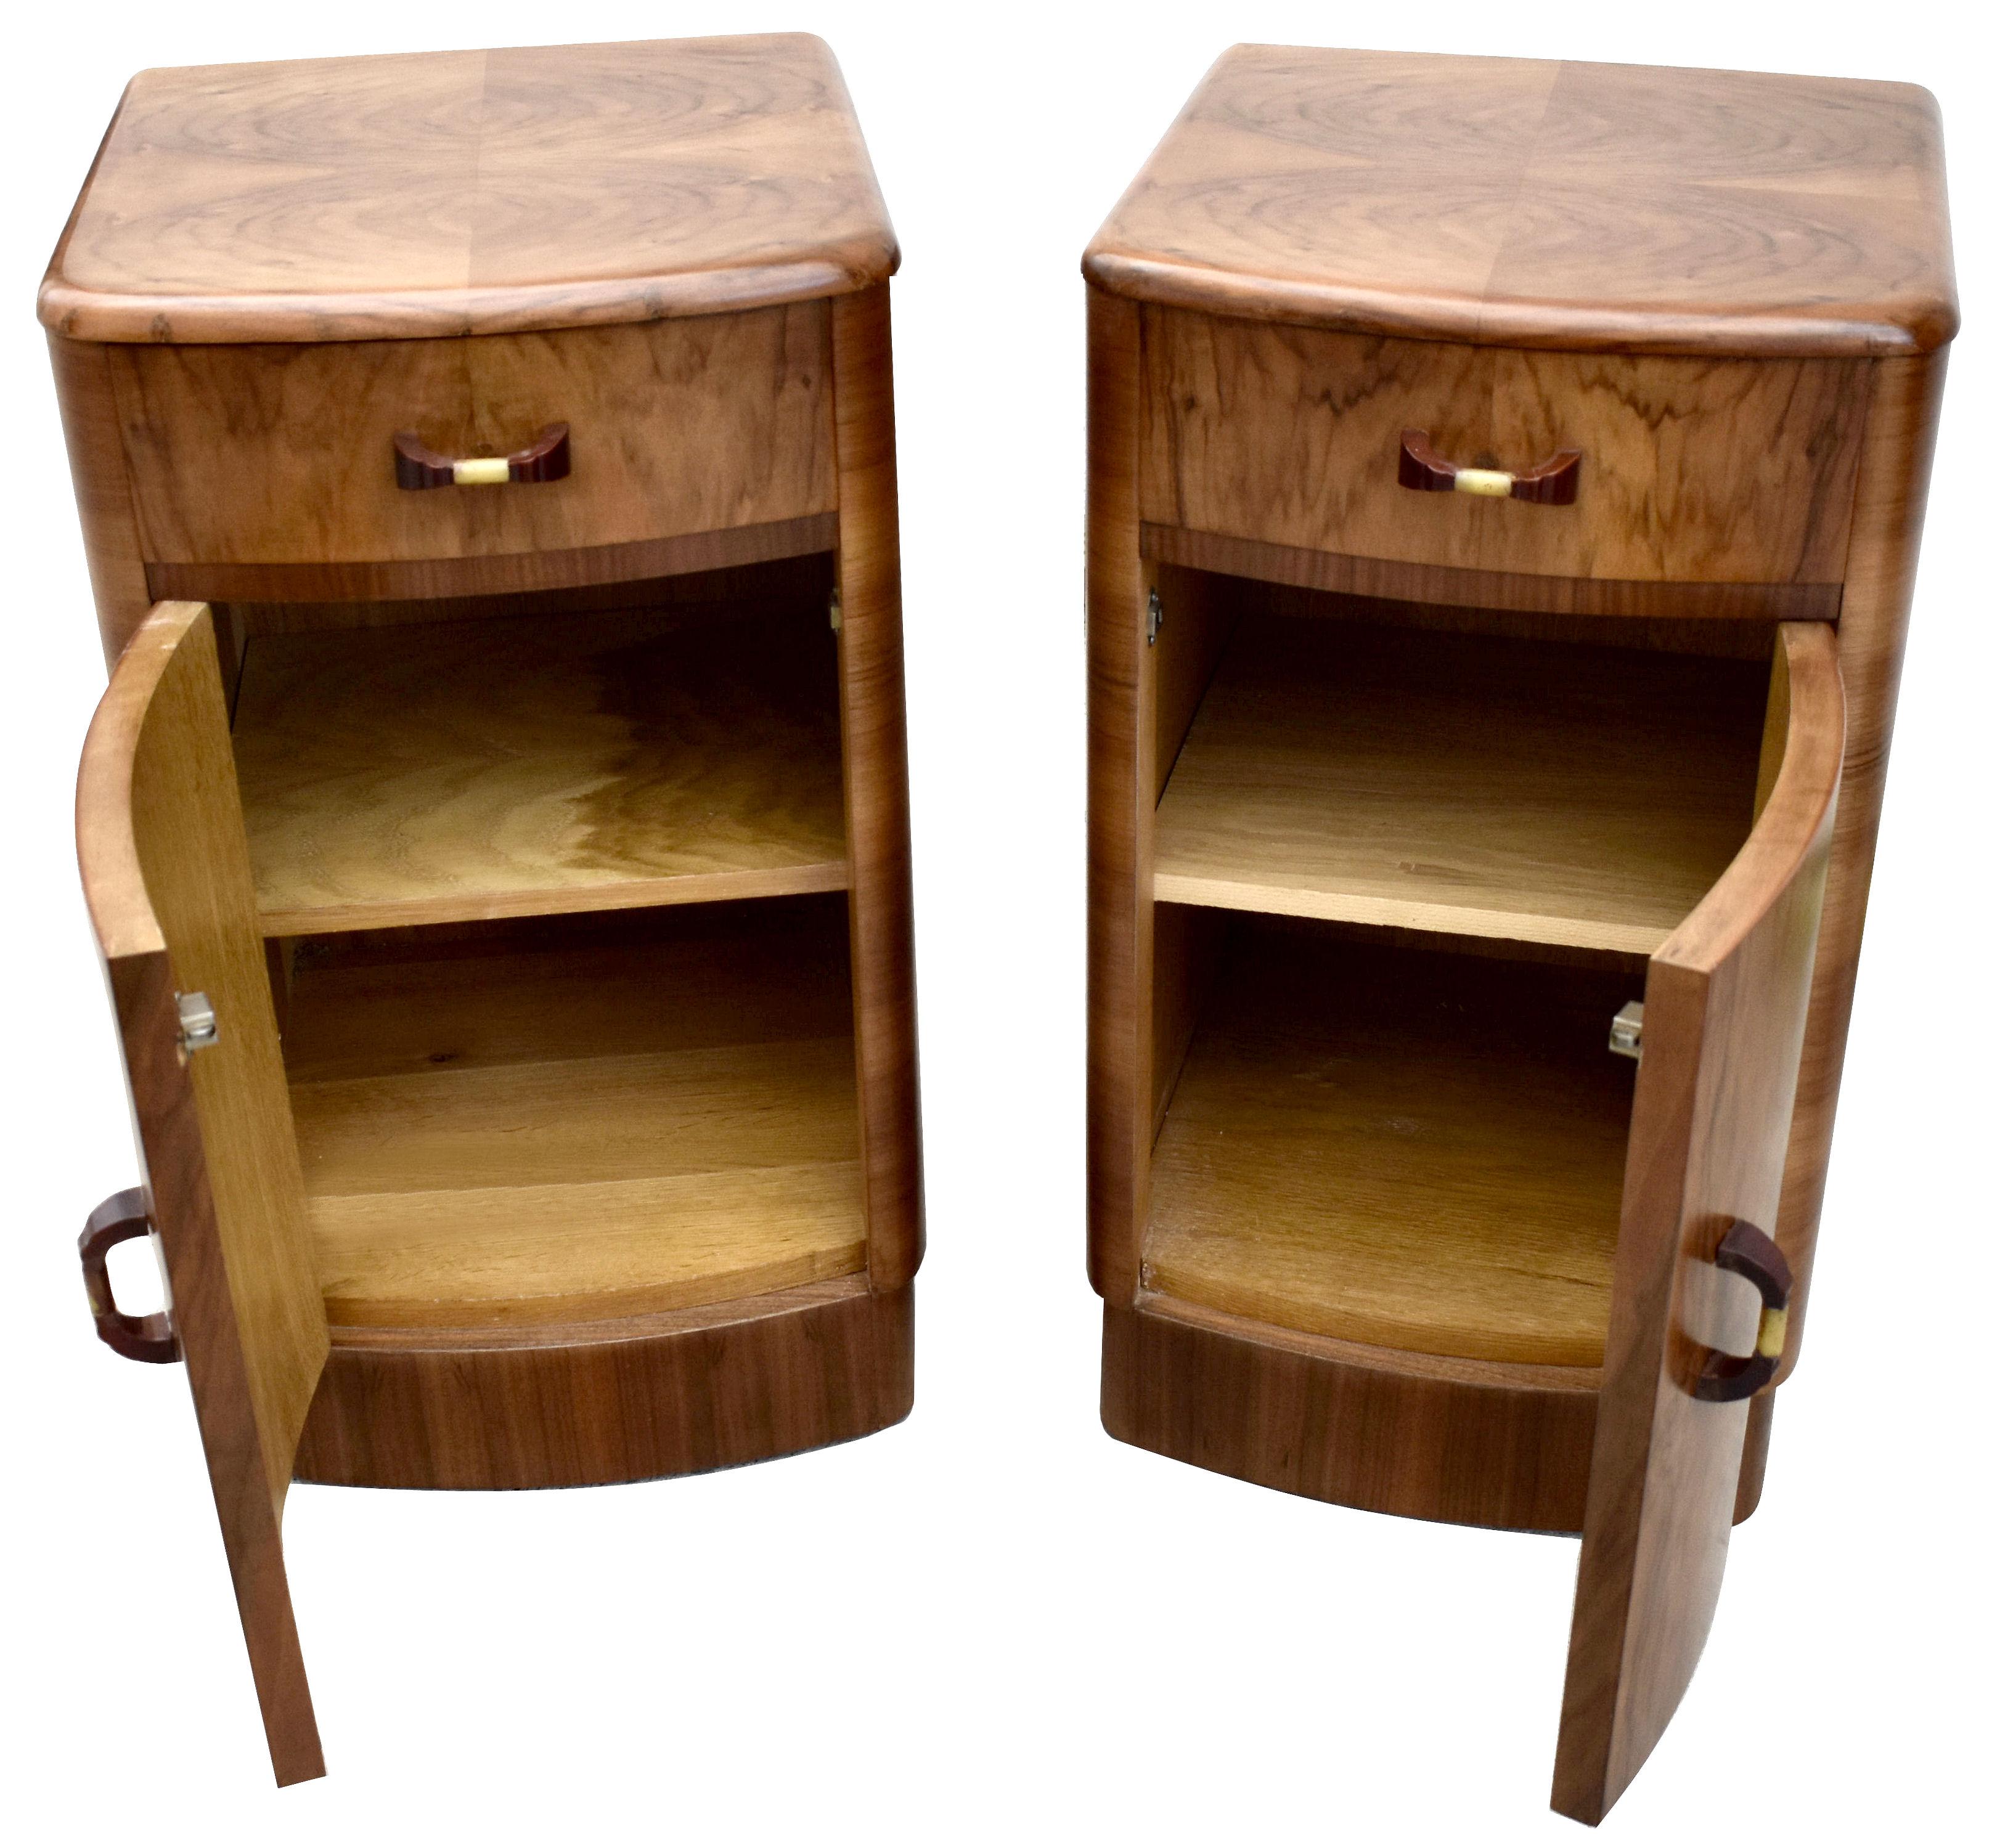 20th Century Art Deco Matching Pair of Walnut Bedside Cabinets Night Stands, English, c 1930